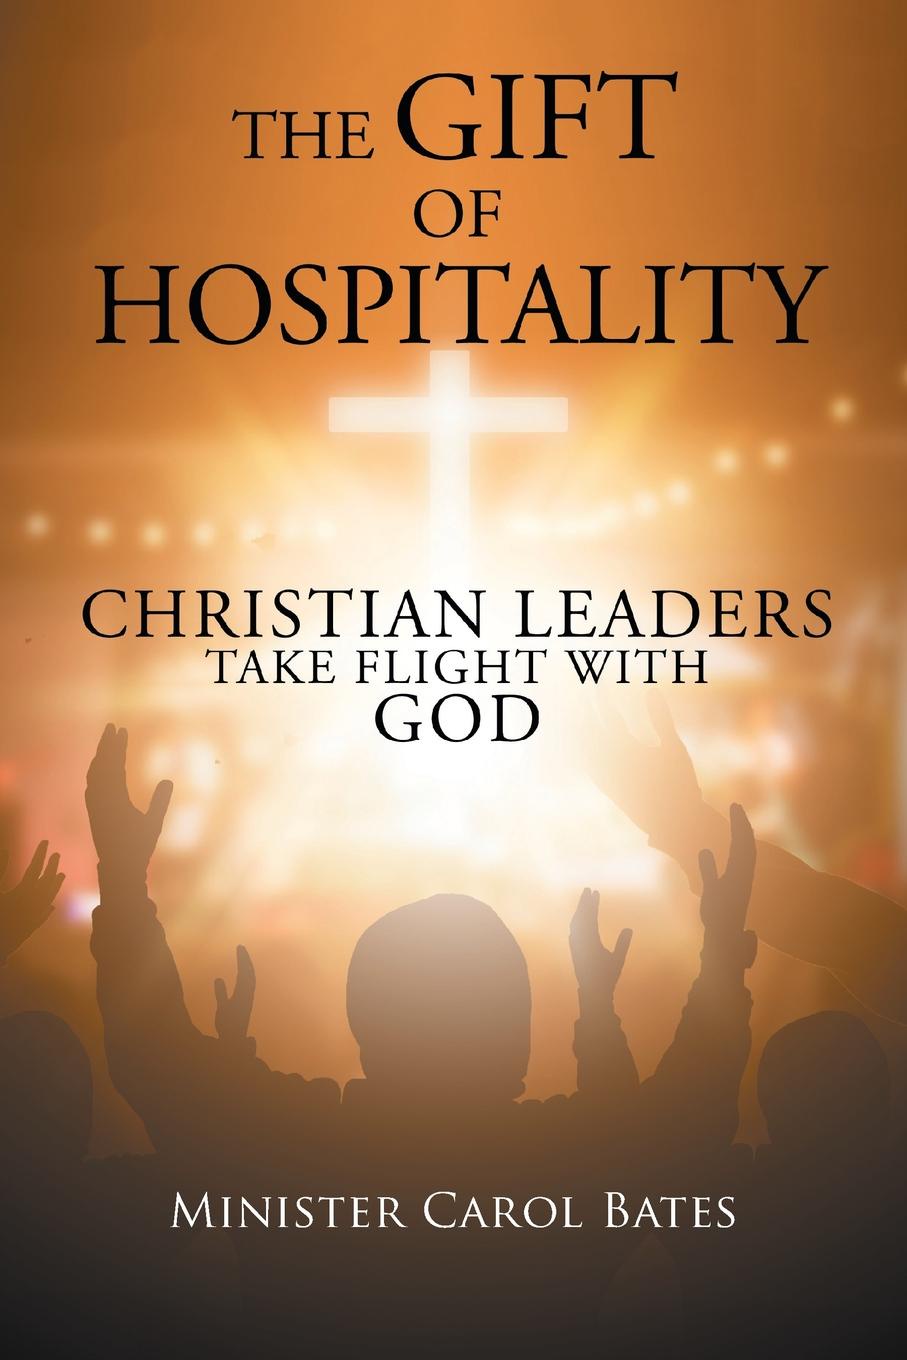 The Gift of Hospitality. Christian Leaders Take Flight with God